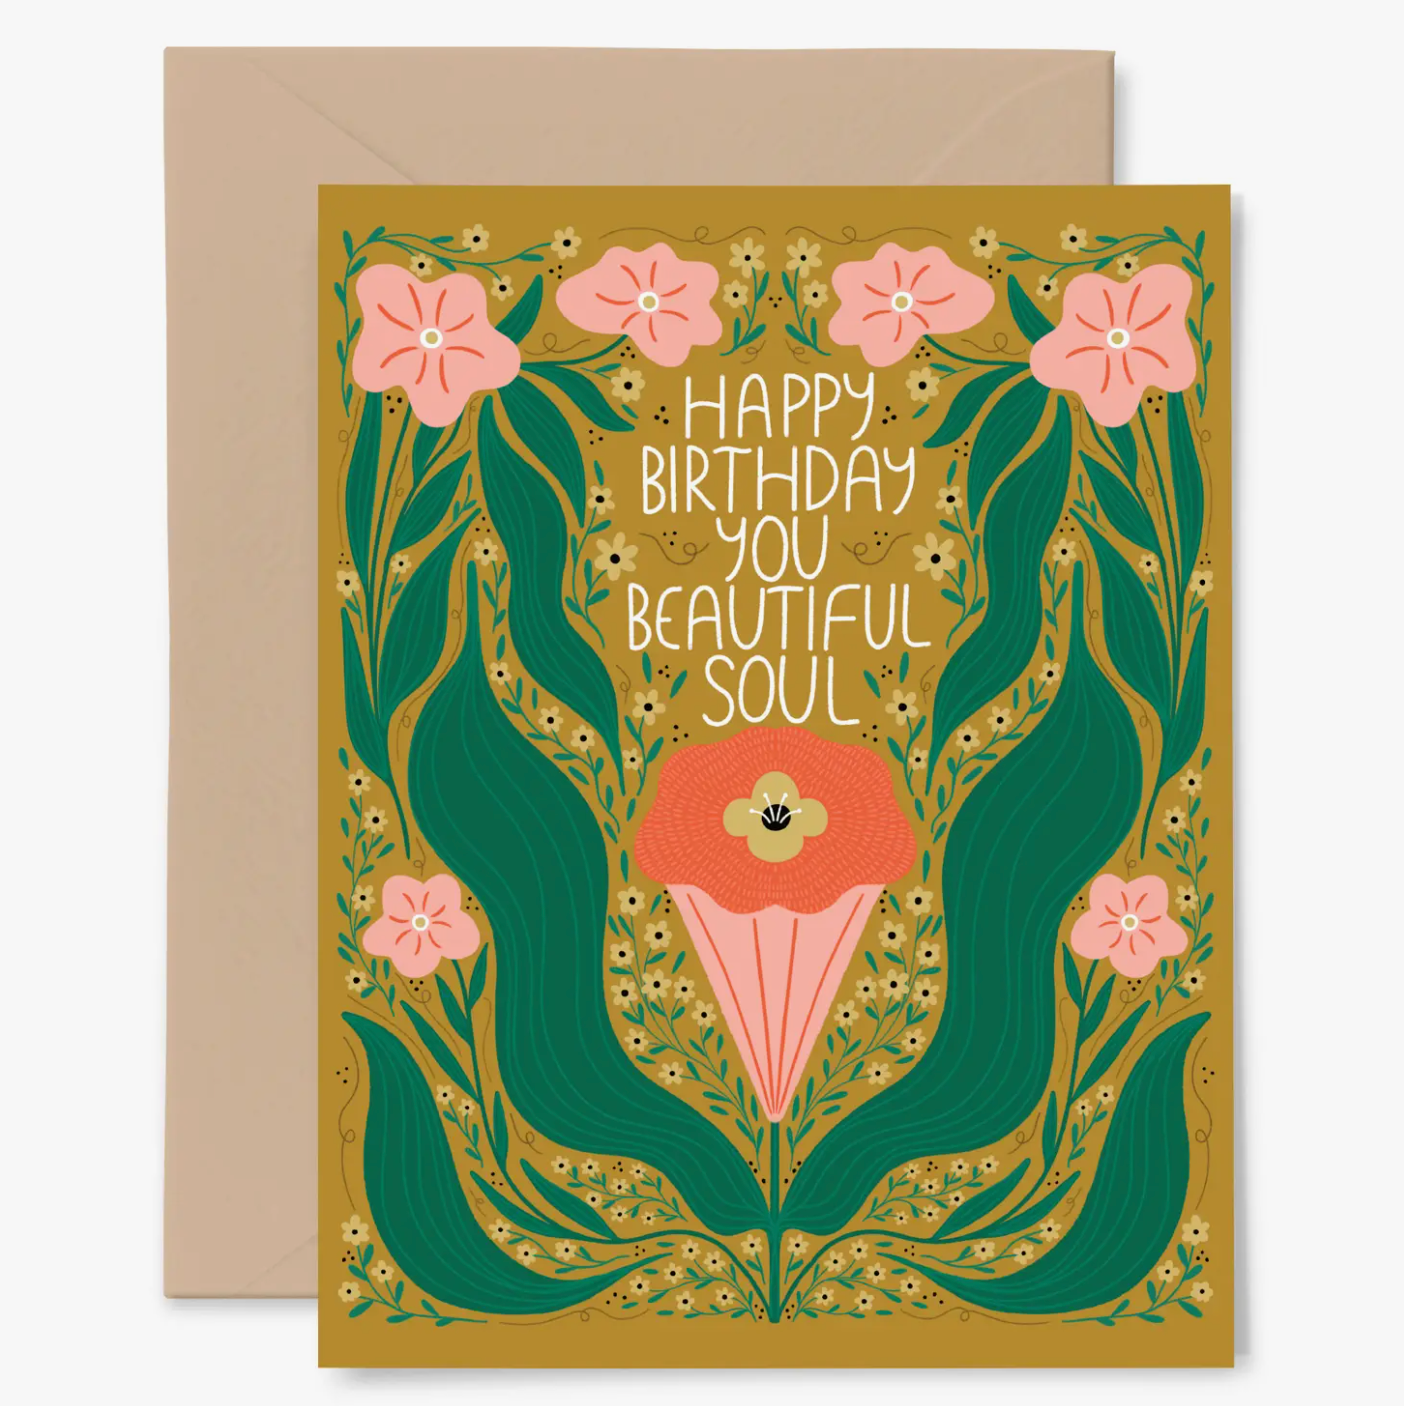 Cards from The Gardeners Wife